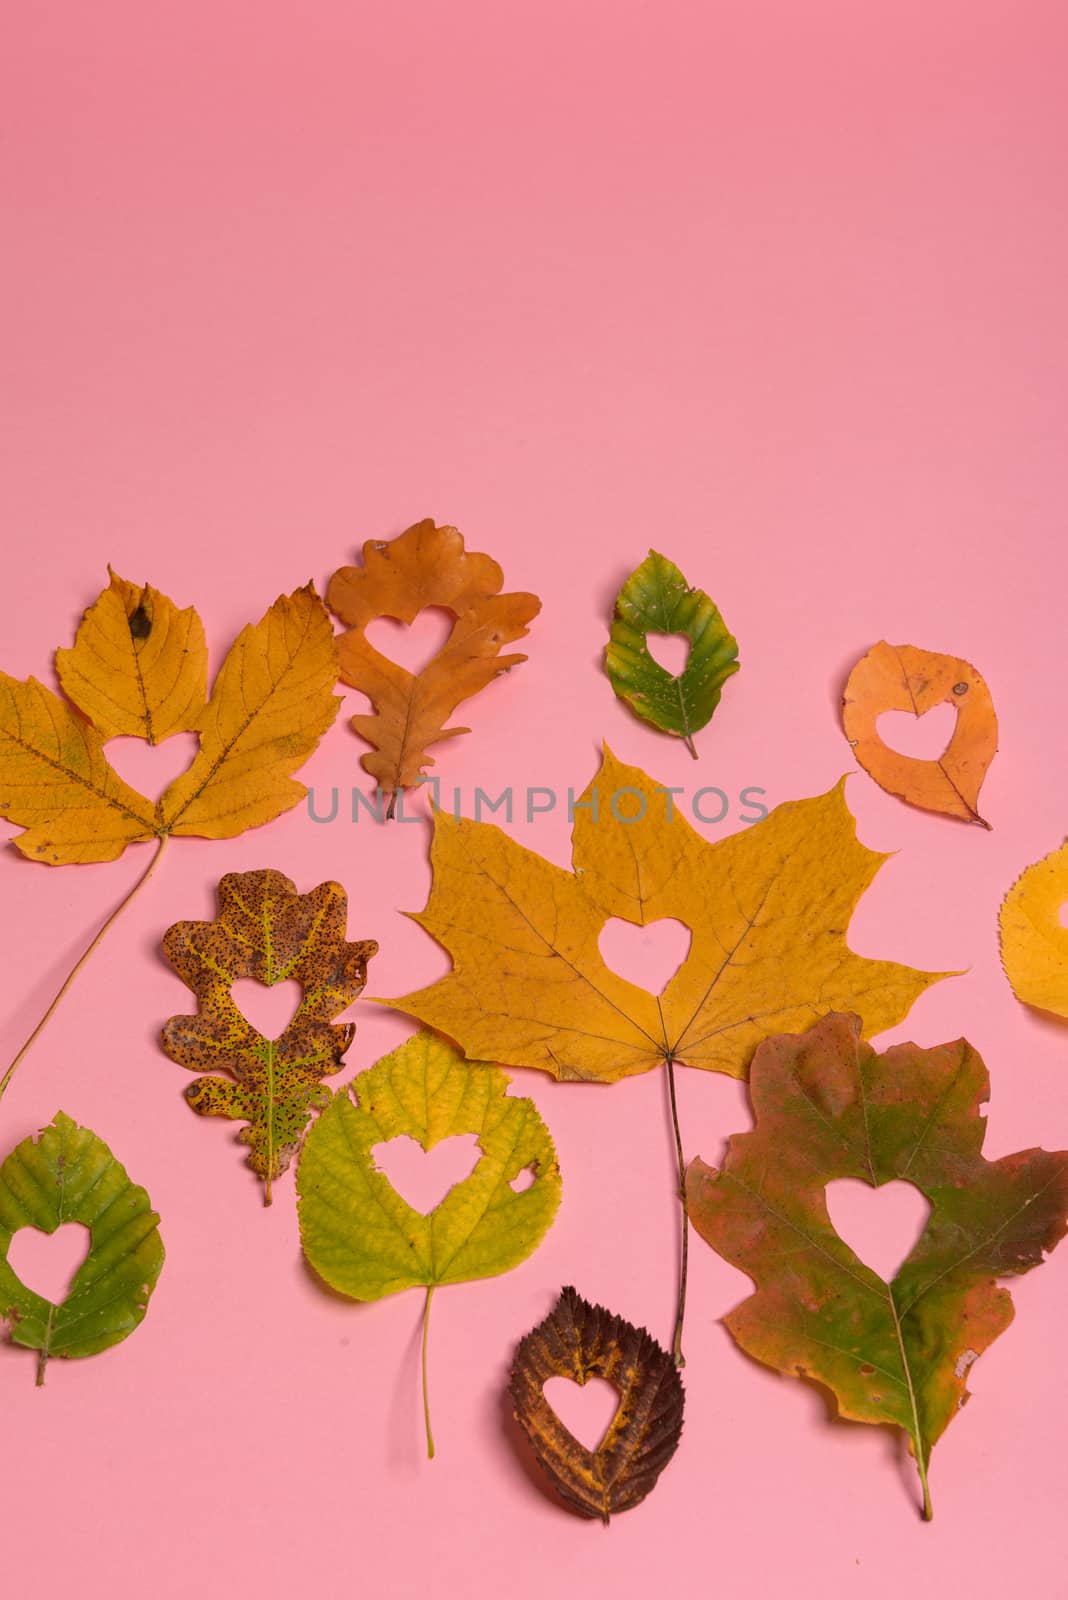 Background group autumn orange, green, yellow and brown leaves. with the heart shape cut out in the middle on pink background. Studio shoot. View from above. Horizontal orientation. Copy space.